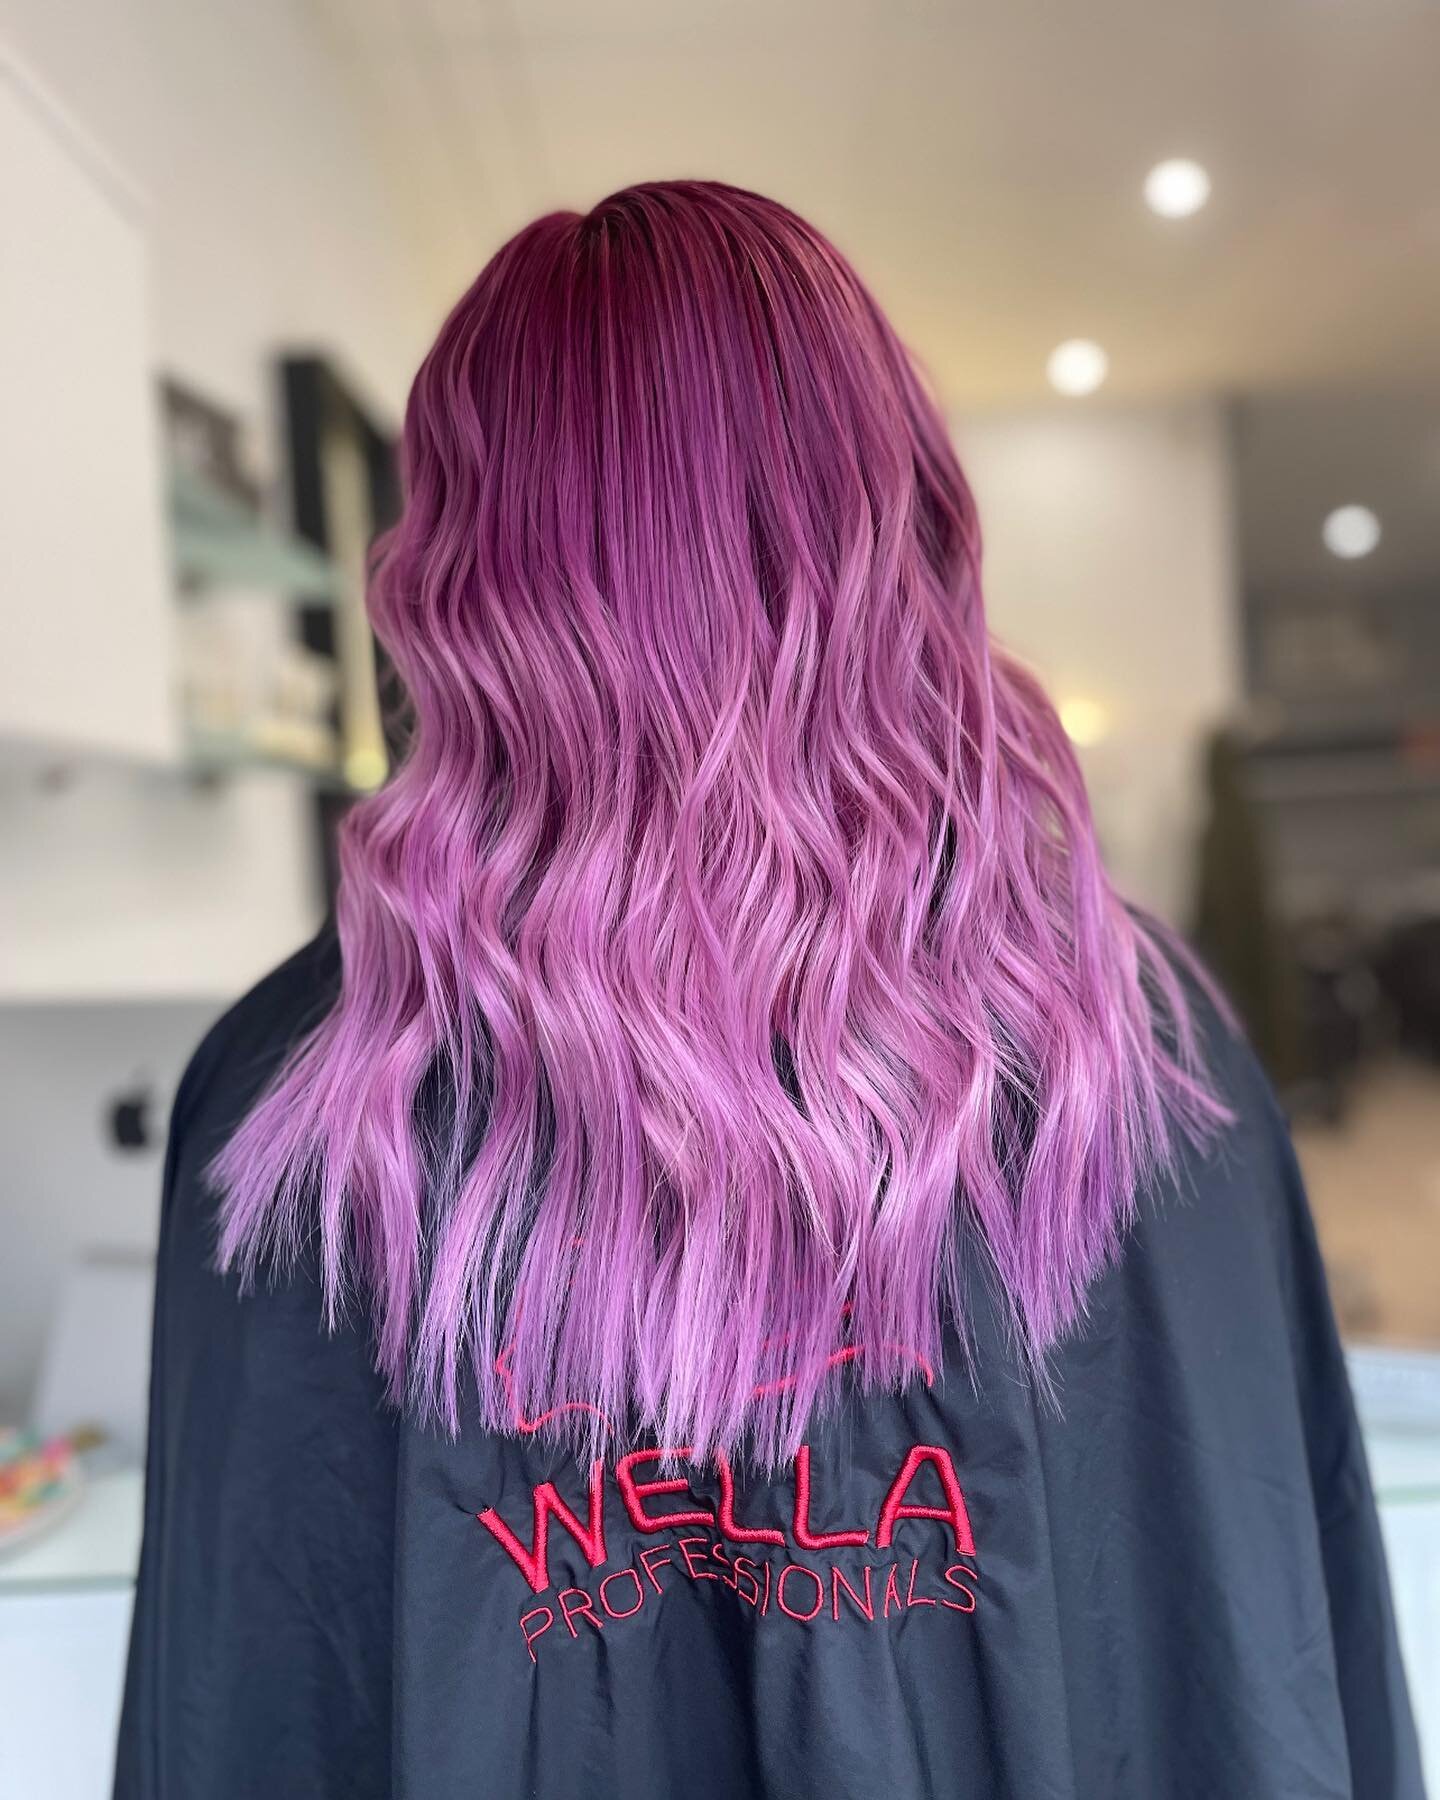 This amazing pink was created by Darcy we are just obsessed with it!!! One very happy client!!! #pinkhair #pinkhairdontcare #pinkhaircolor #wella #wellahair #wellaprofessional